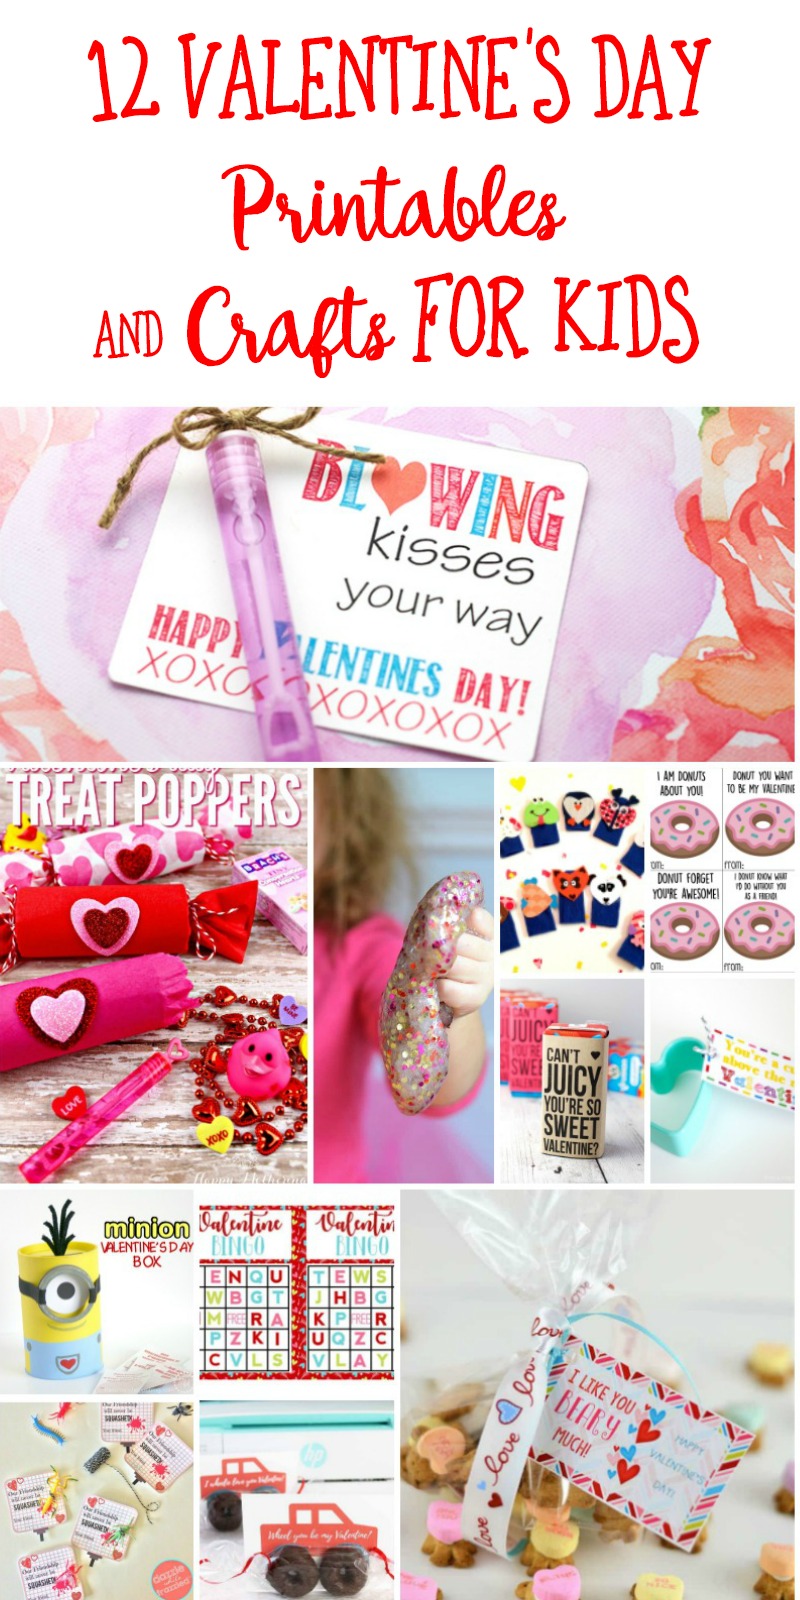 12 Valentine's Day Printables and Crafts for Kids